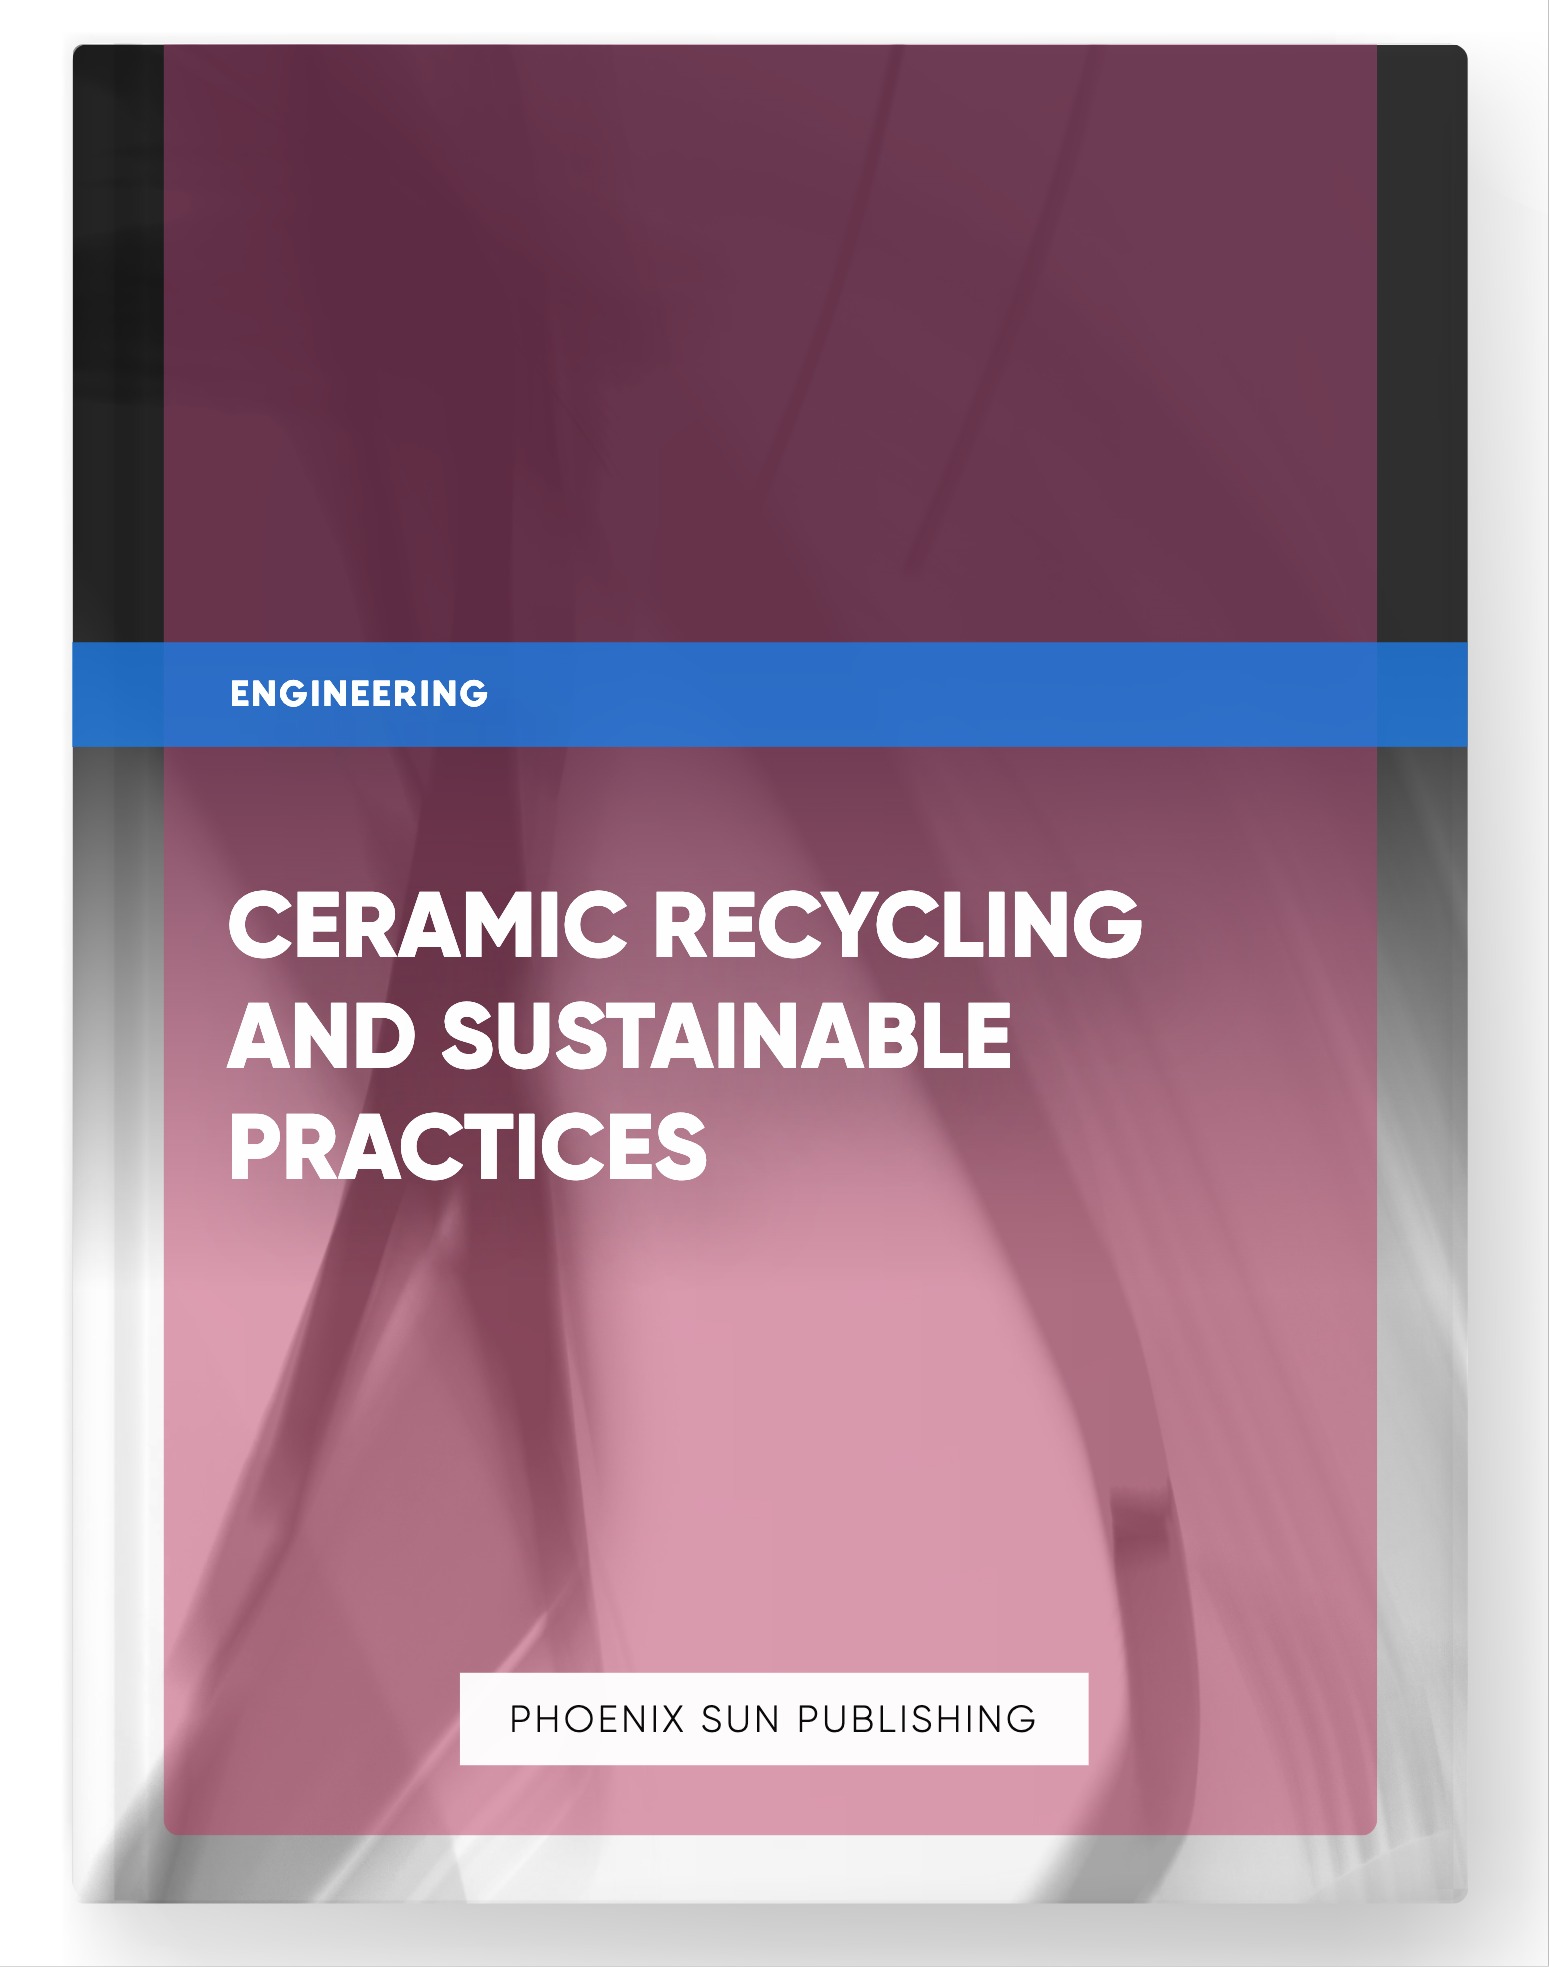 Ceramic Recycling and Sustainable Practices